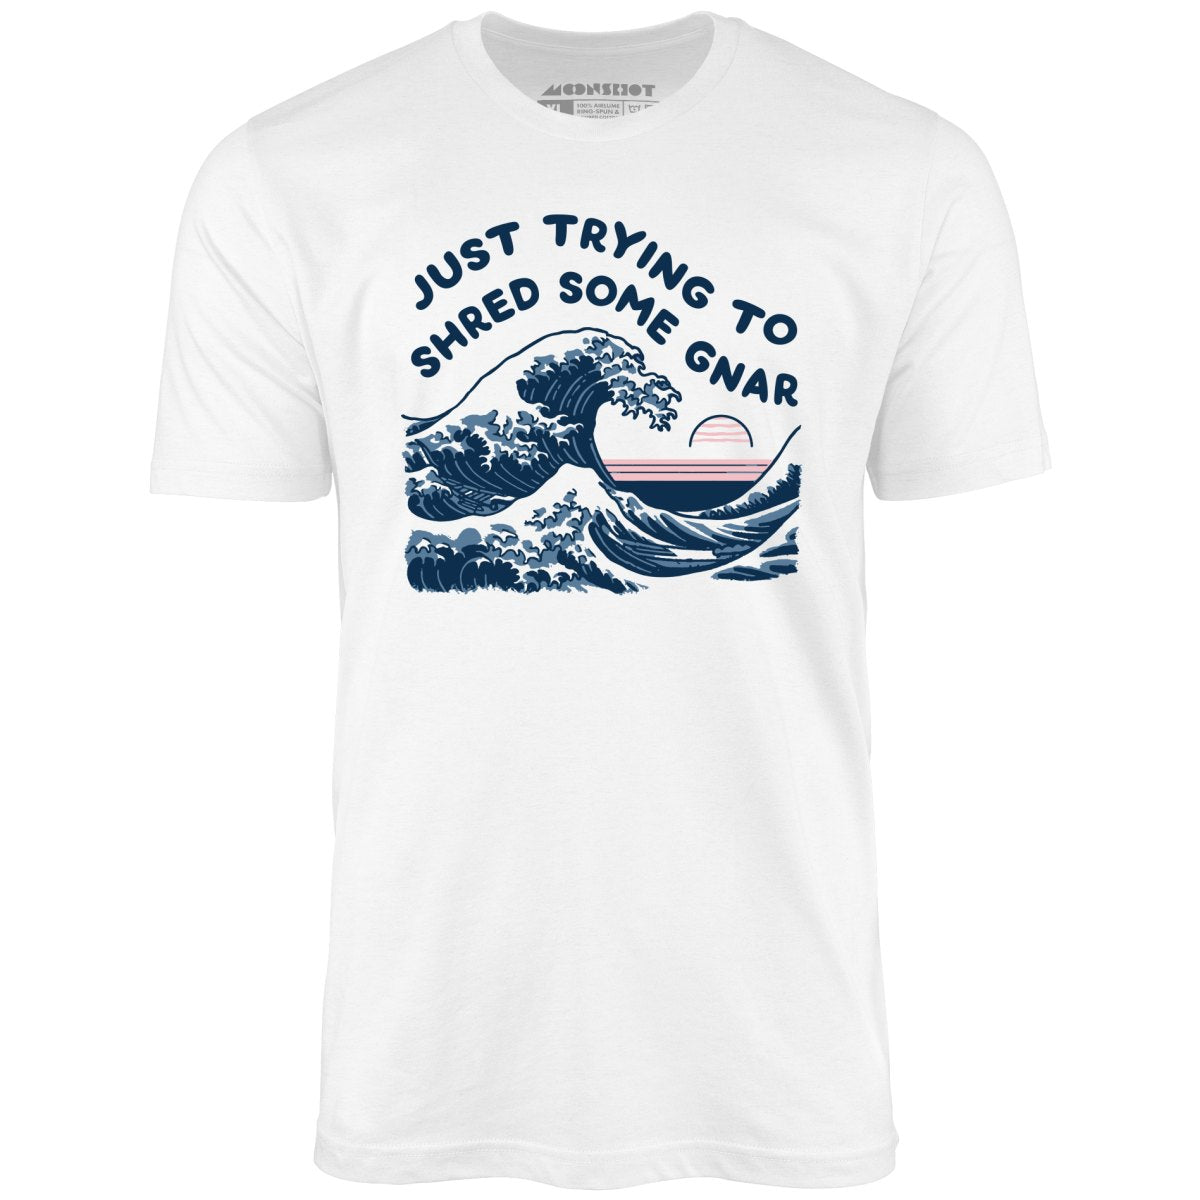 Just Trying to Shred Some Gnar - Unisex T-Shirt